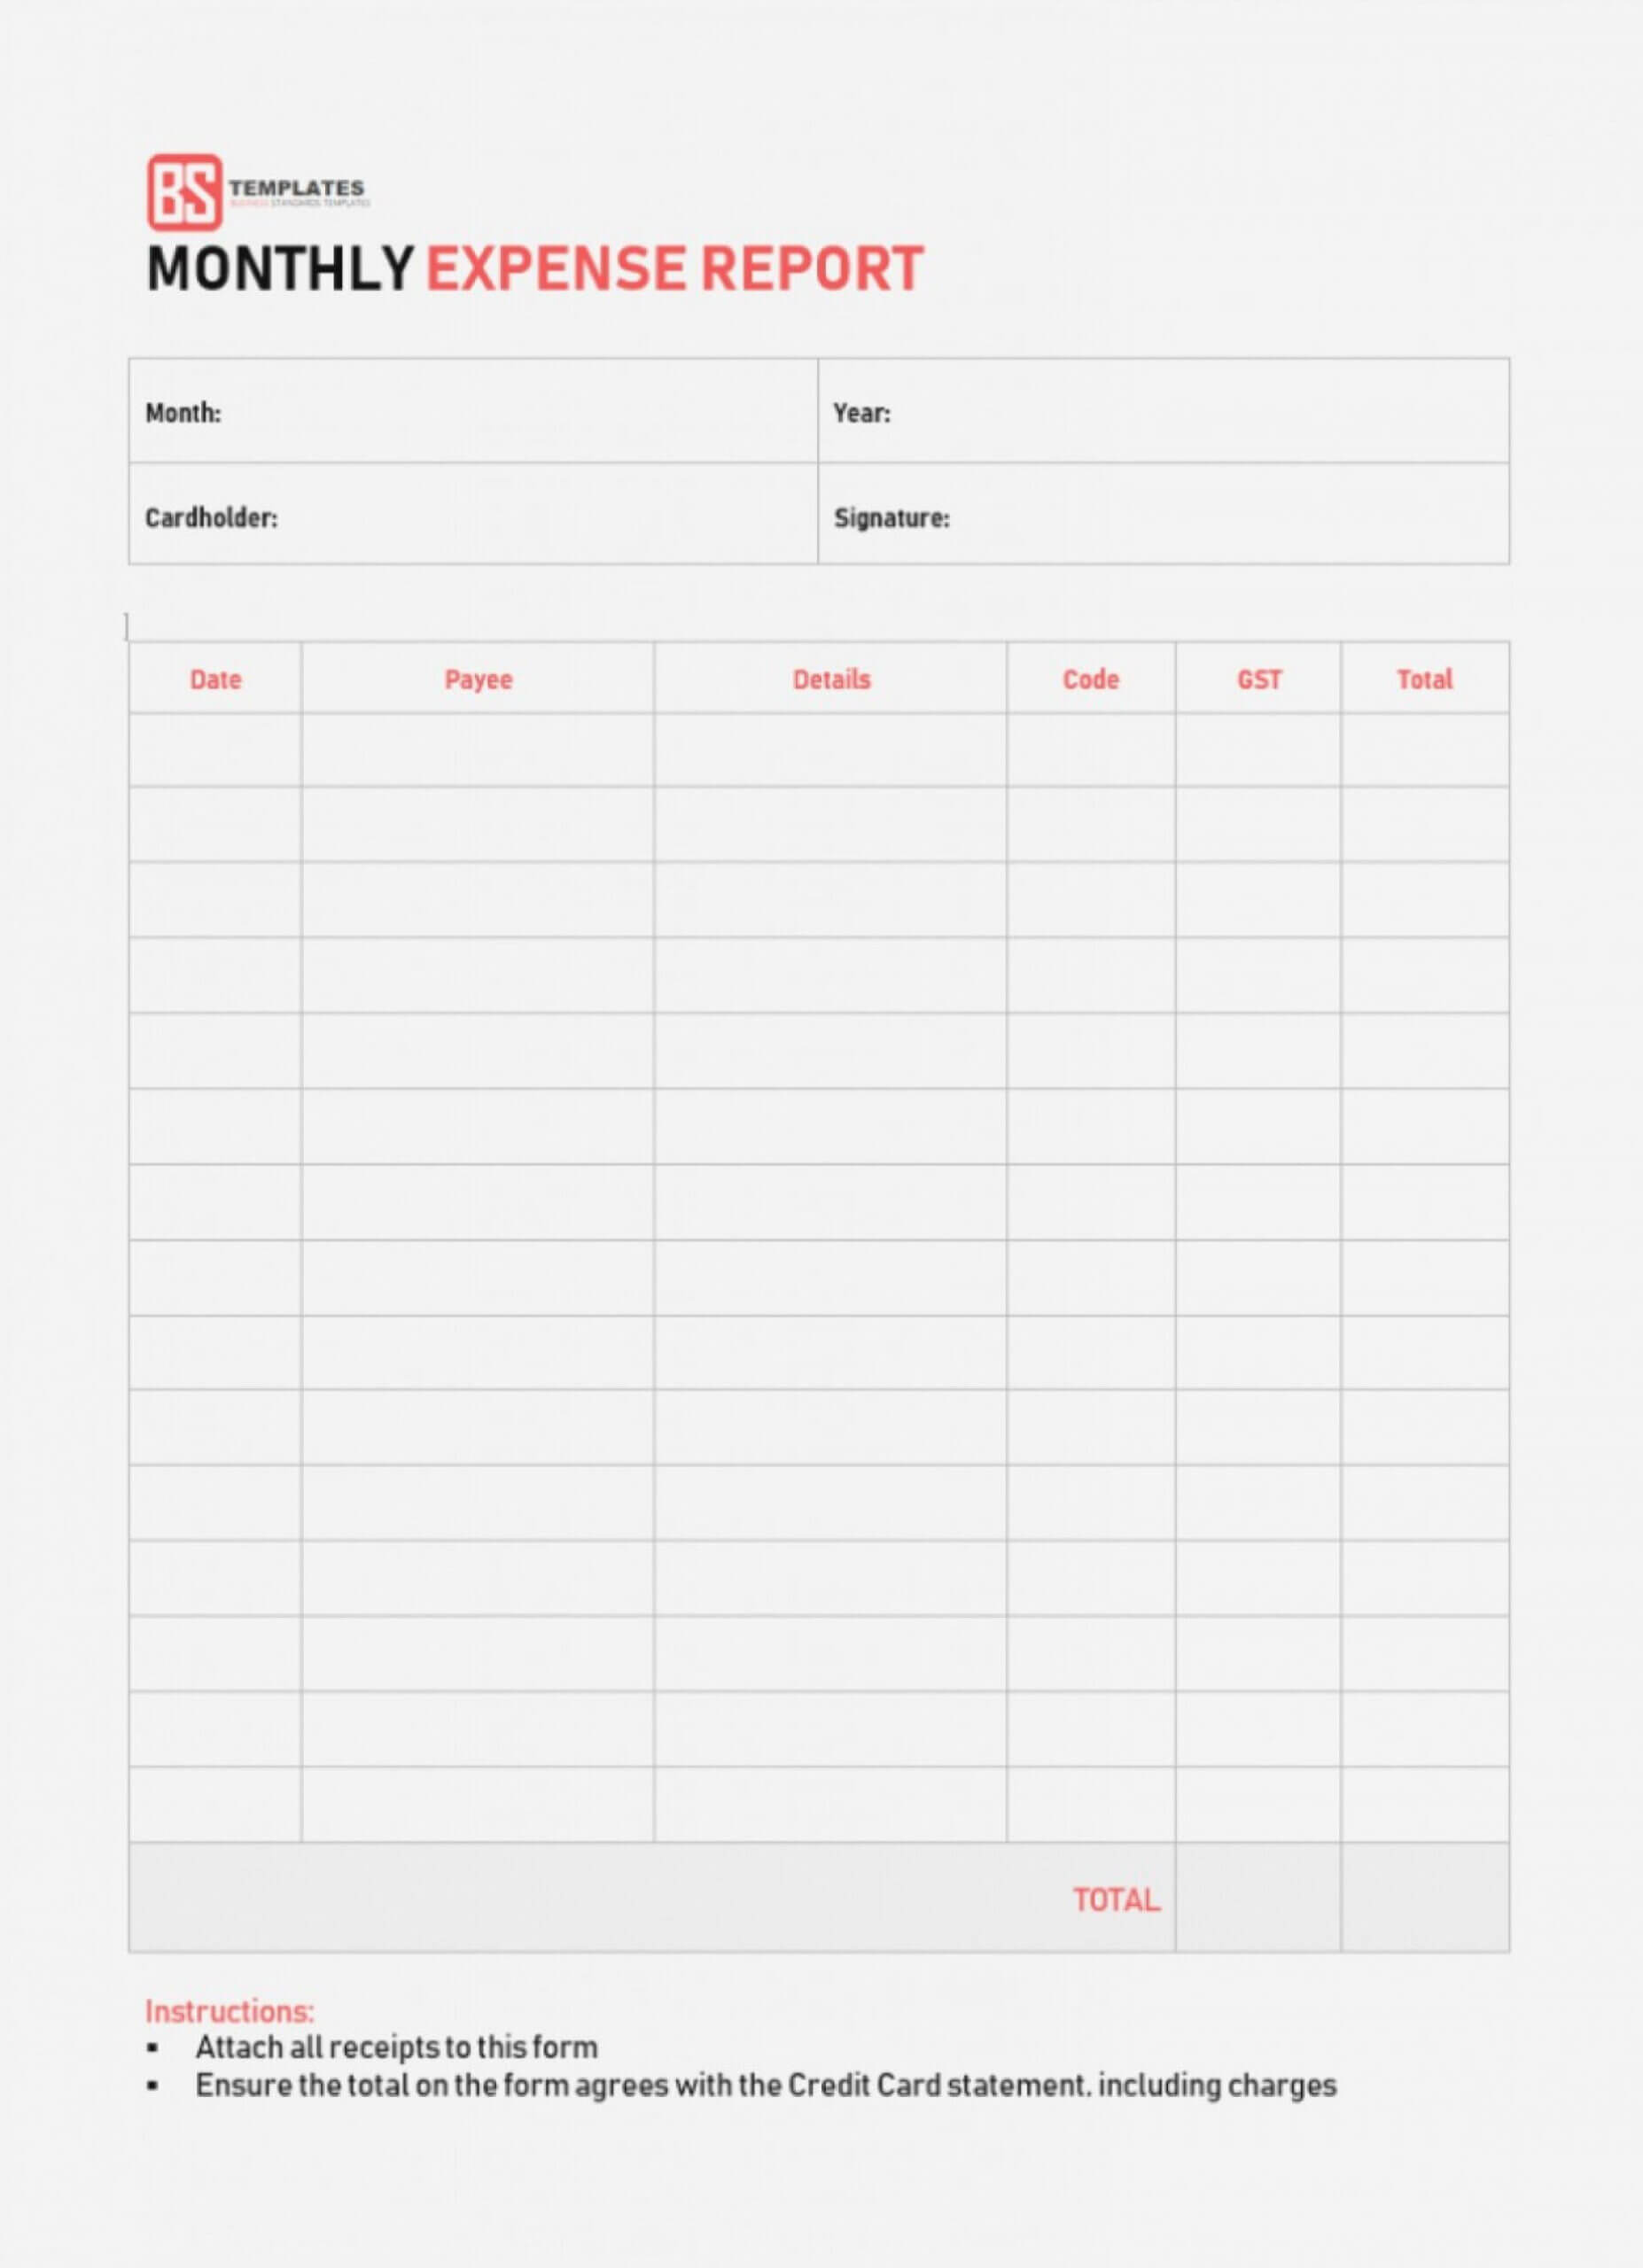 Magnificent Expenses Report Template Excel Ideas Monthly Regarding Monthly Expense Report Template Excel